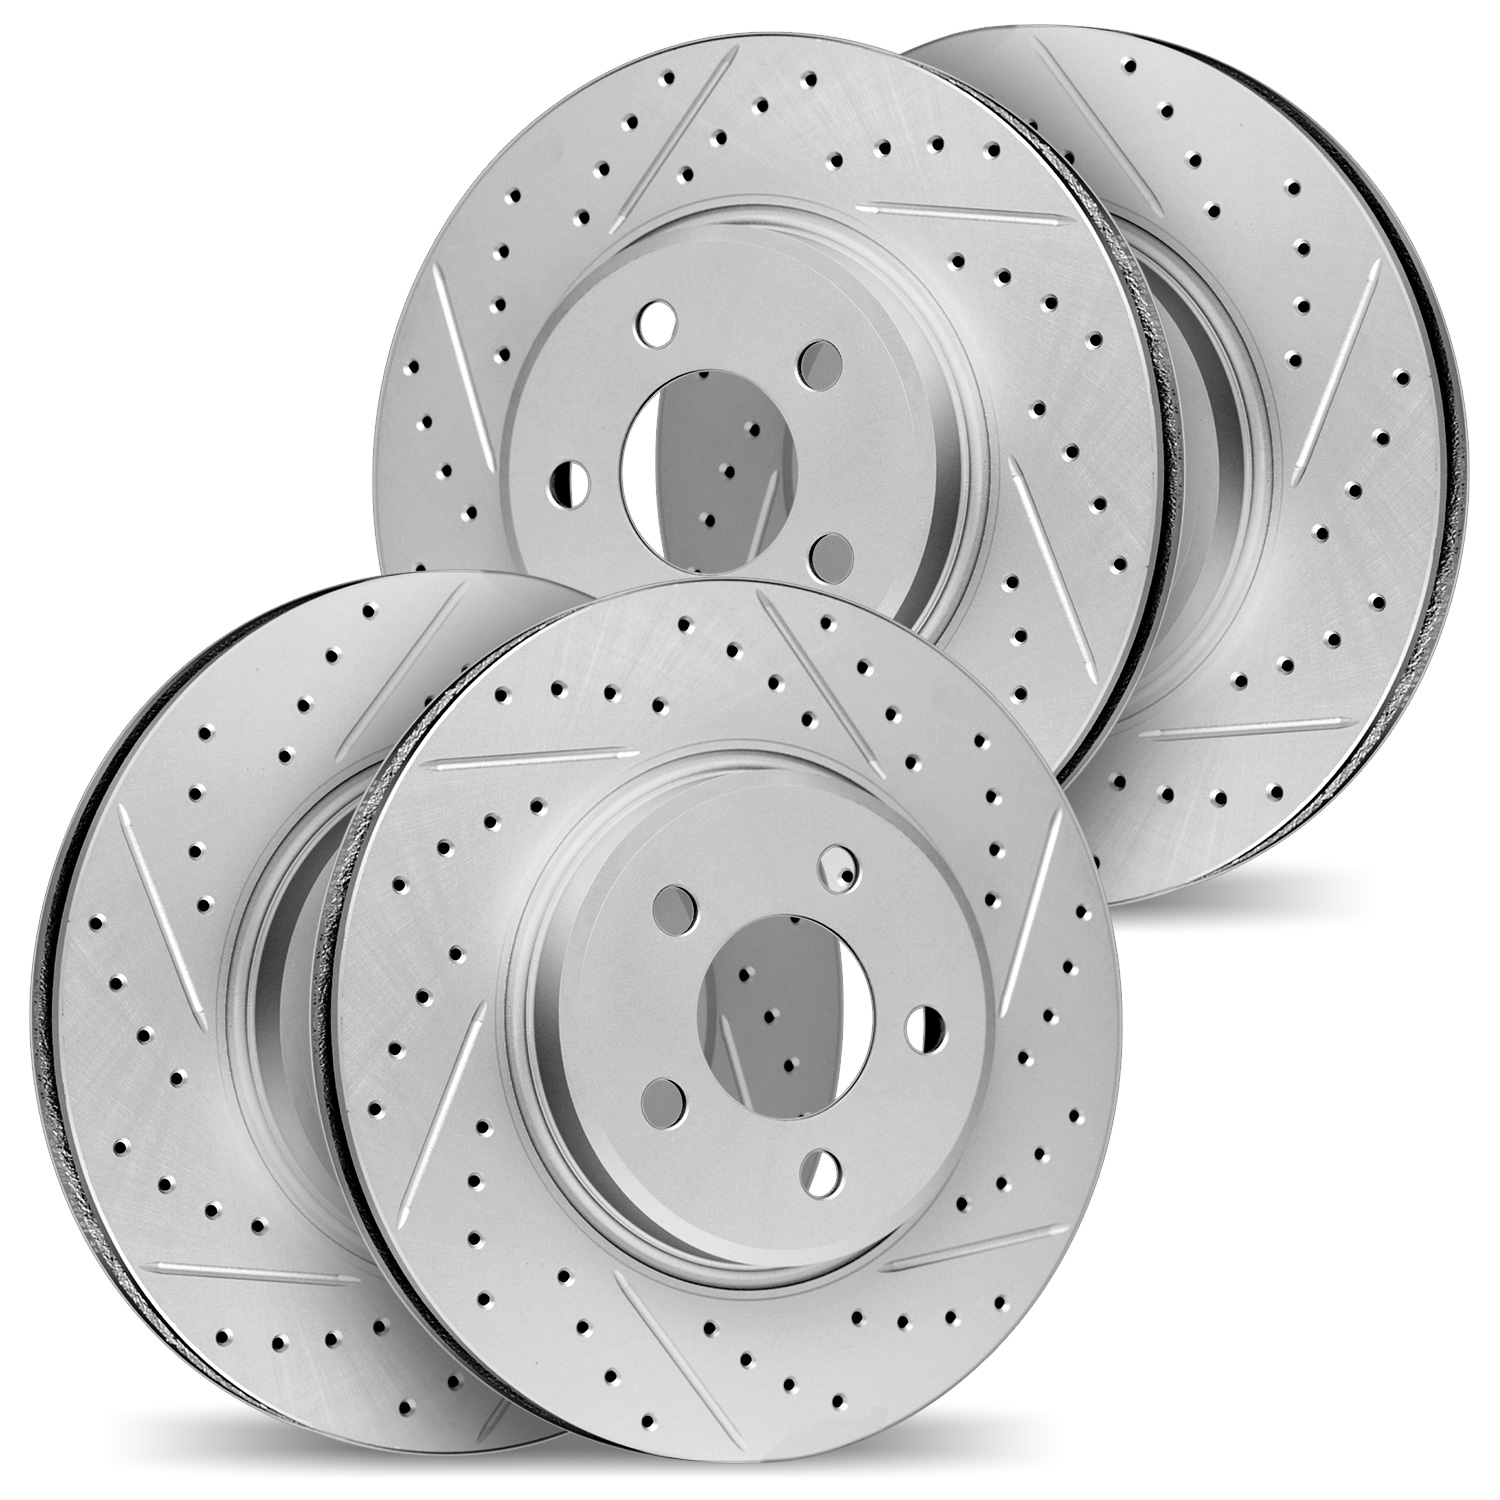 2004-13035 Geoperformance Drilled/Slotted Brake Rotors, 2015-2019 Subaru, Position: Front and Rear